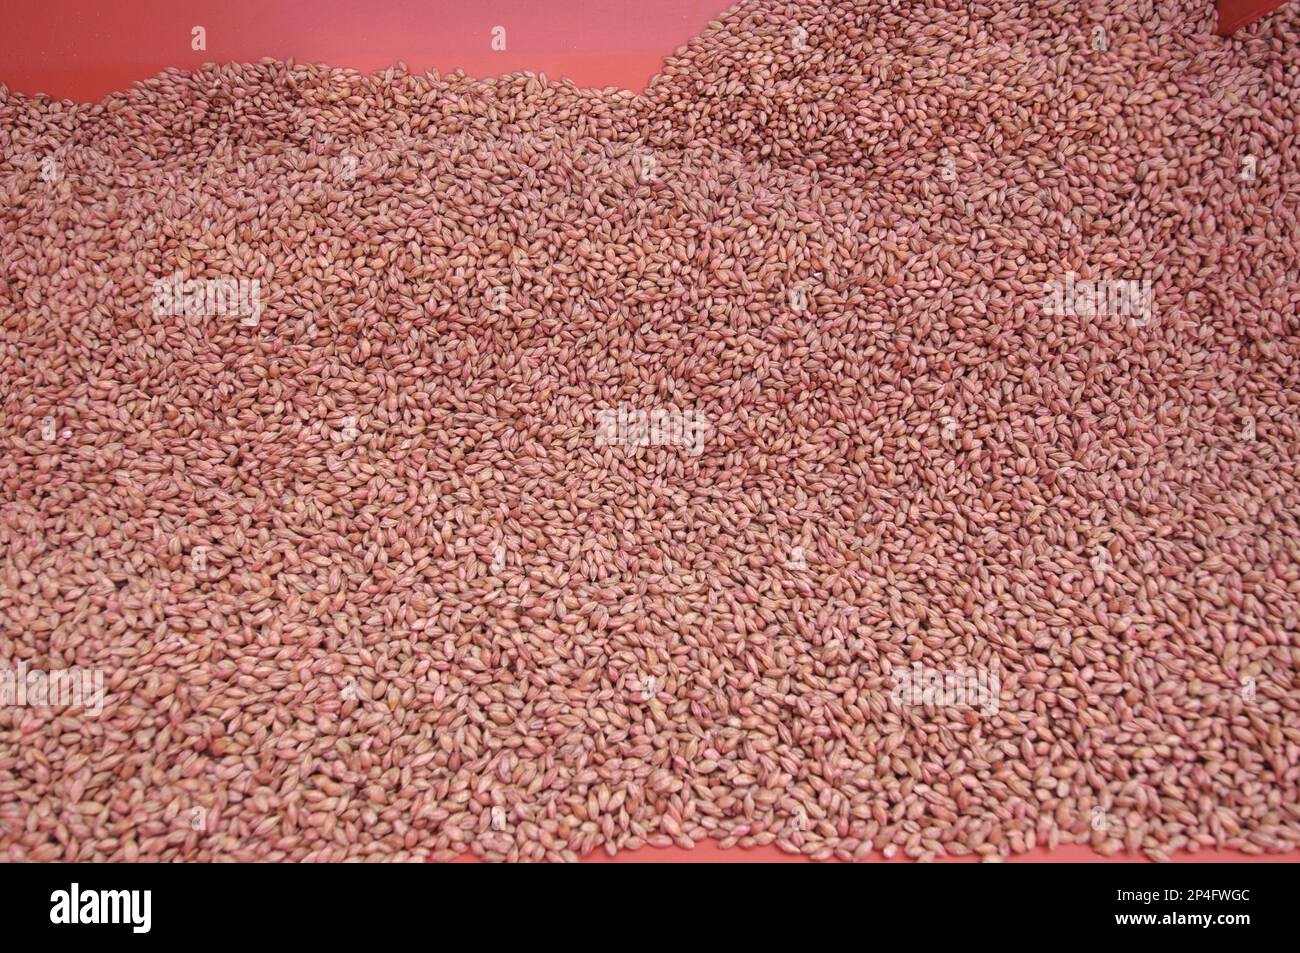 Close-up of Westminster spring barley seed in seed bin, Pilling, Lancashire, England, United Kingdom Stock Photo